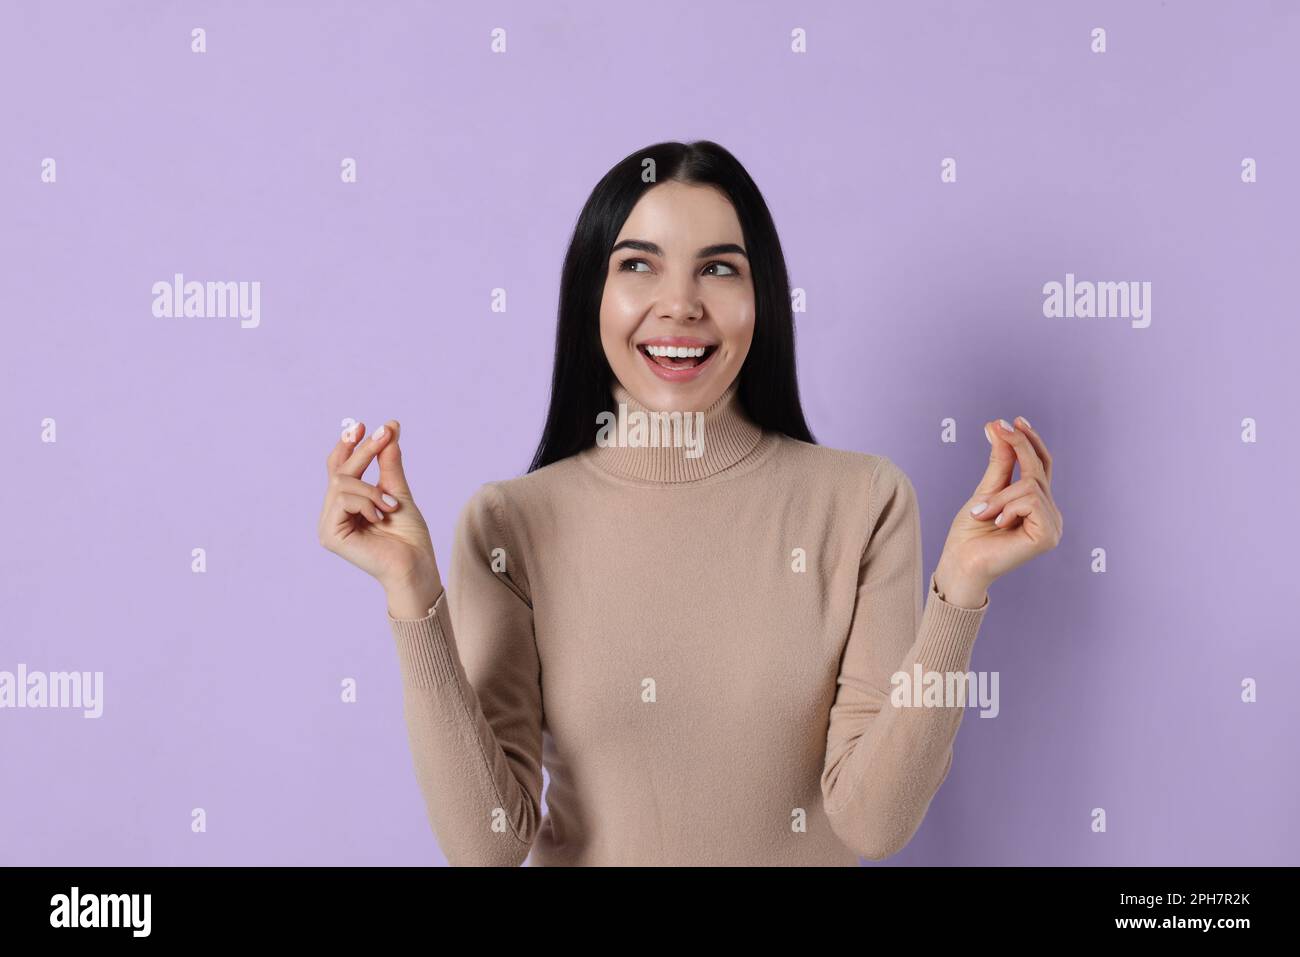 Young woman snapping fingers on violet background Stock Photo